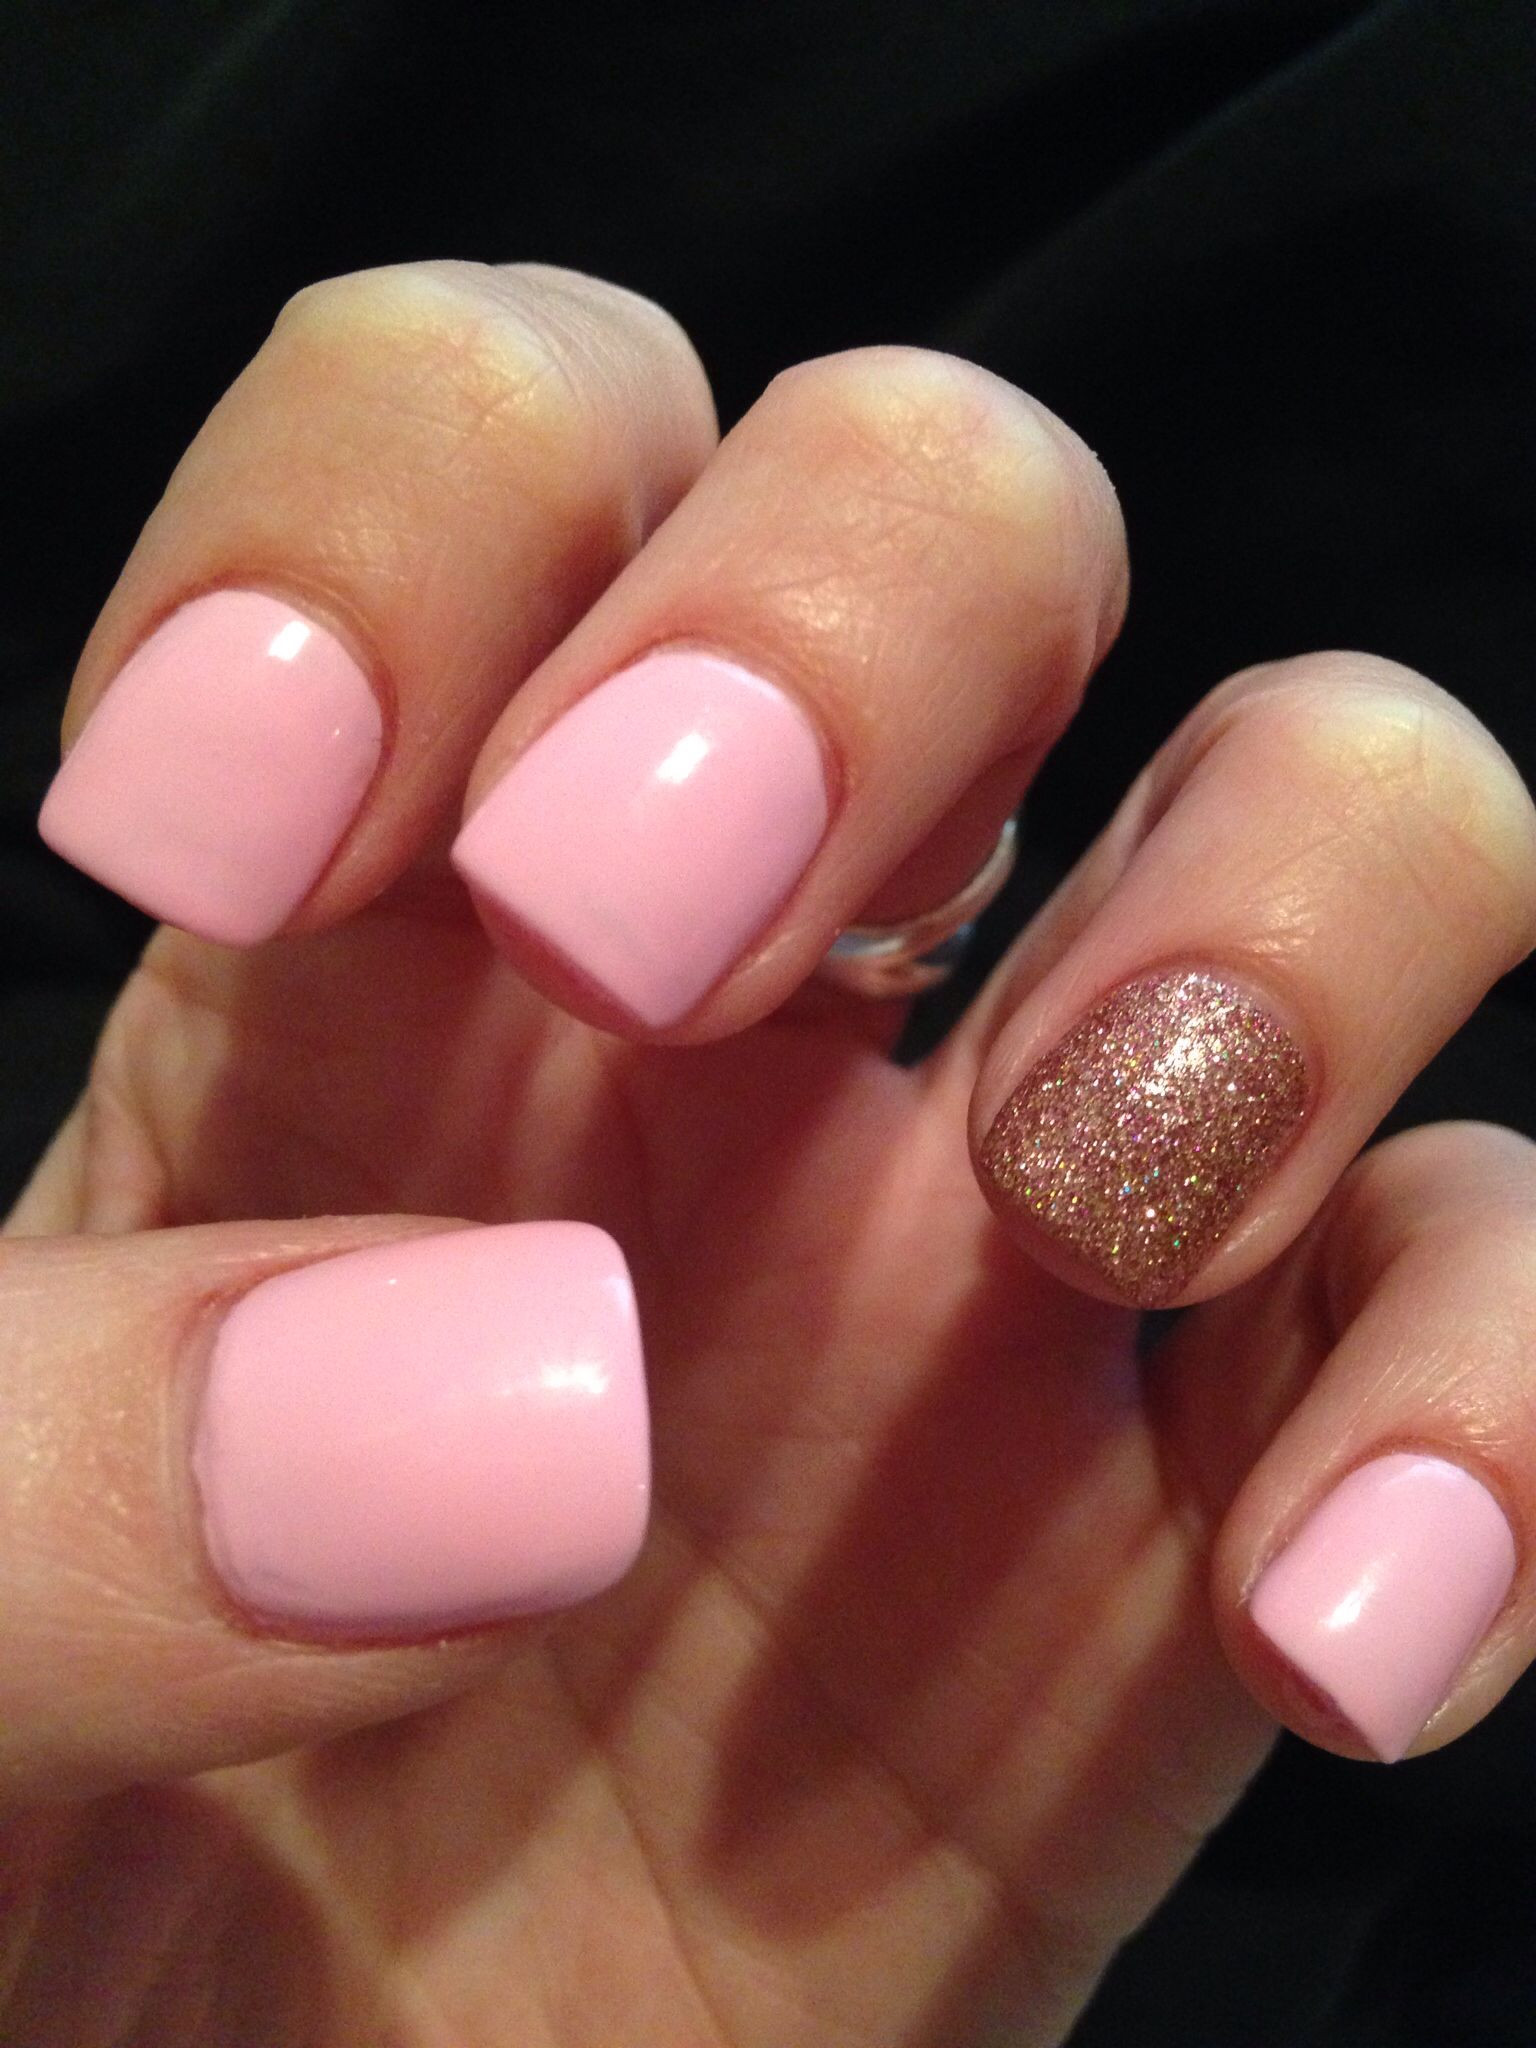 Light Pink Nails With Gold Glitter
 Light pink and glitter chinaglaze acrylics nails